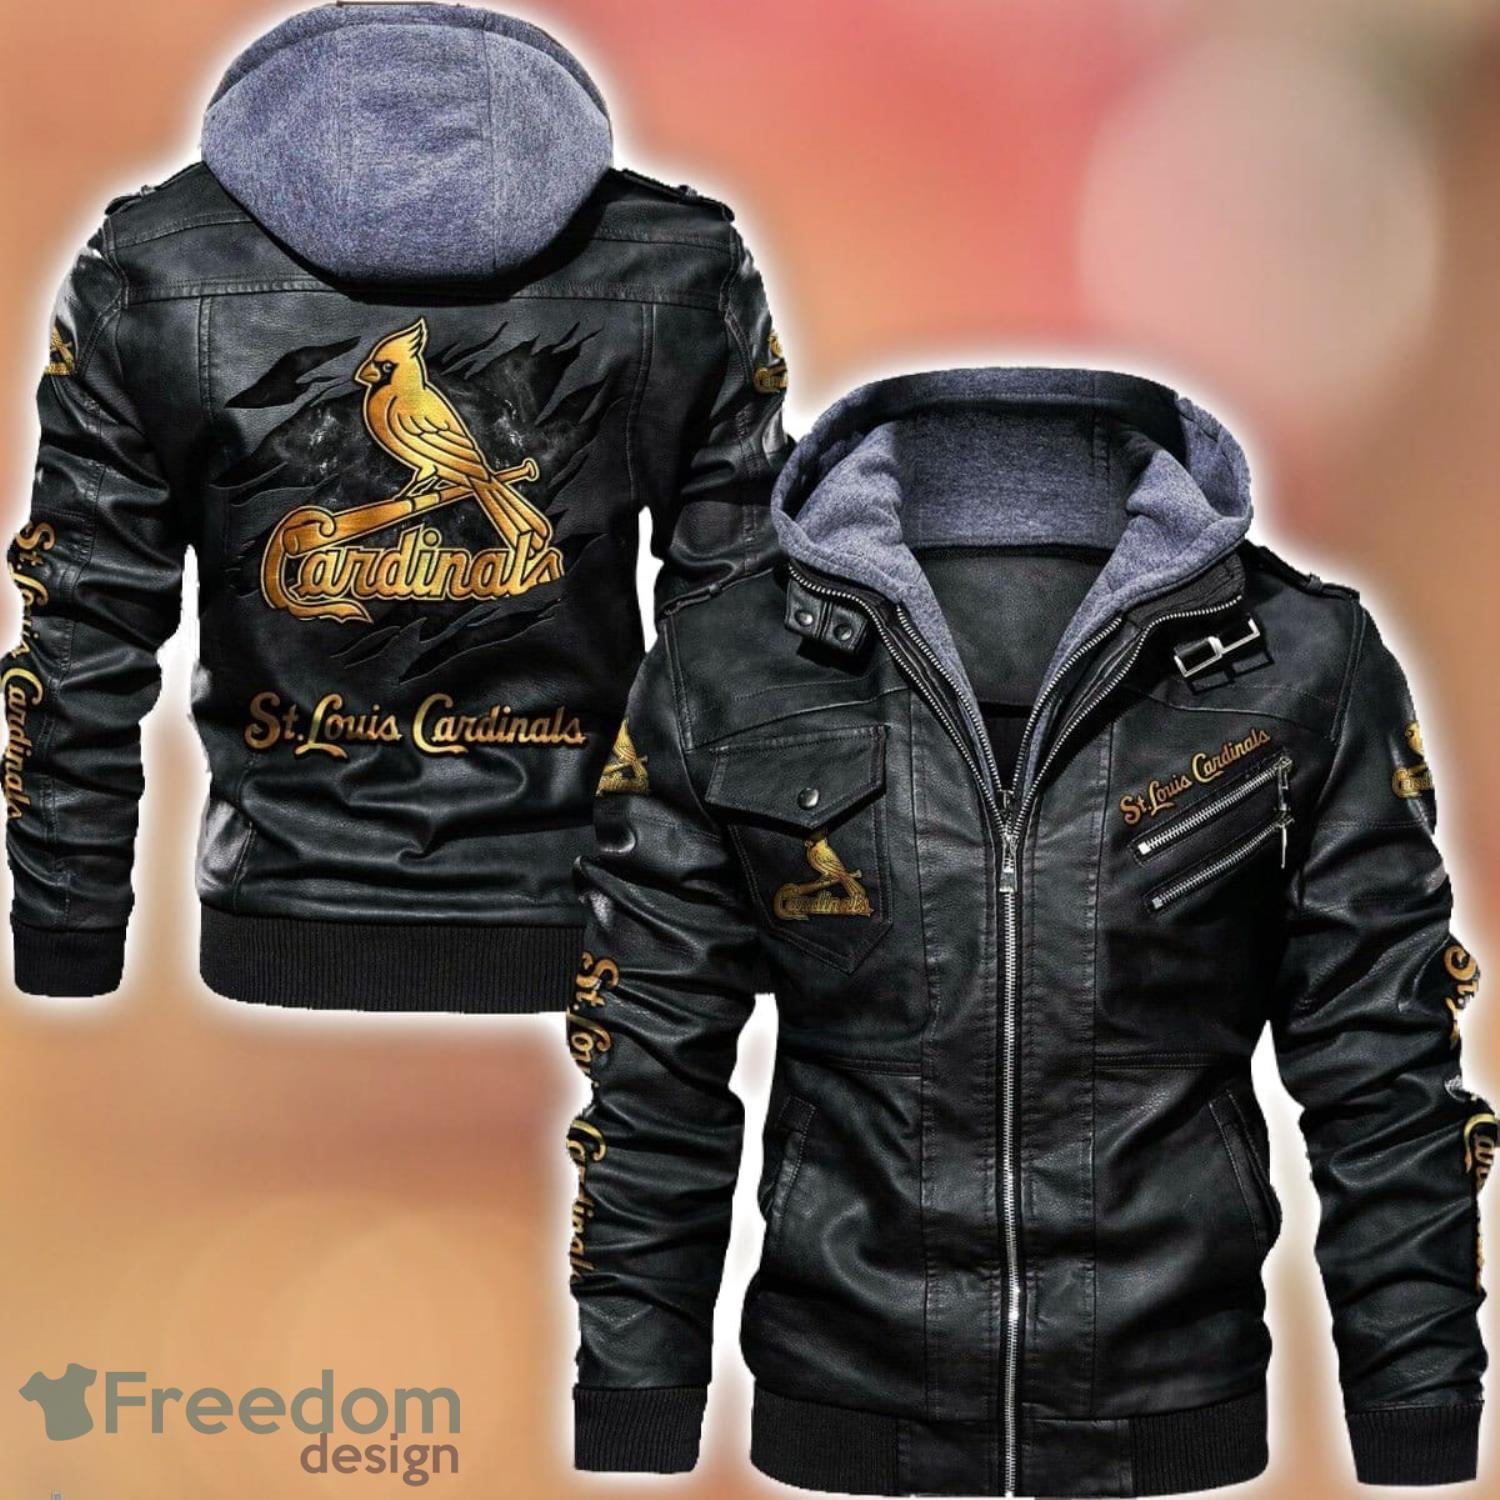 St. Louis Cardinals Leather Jacket For Fans - Freedomdesign